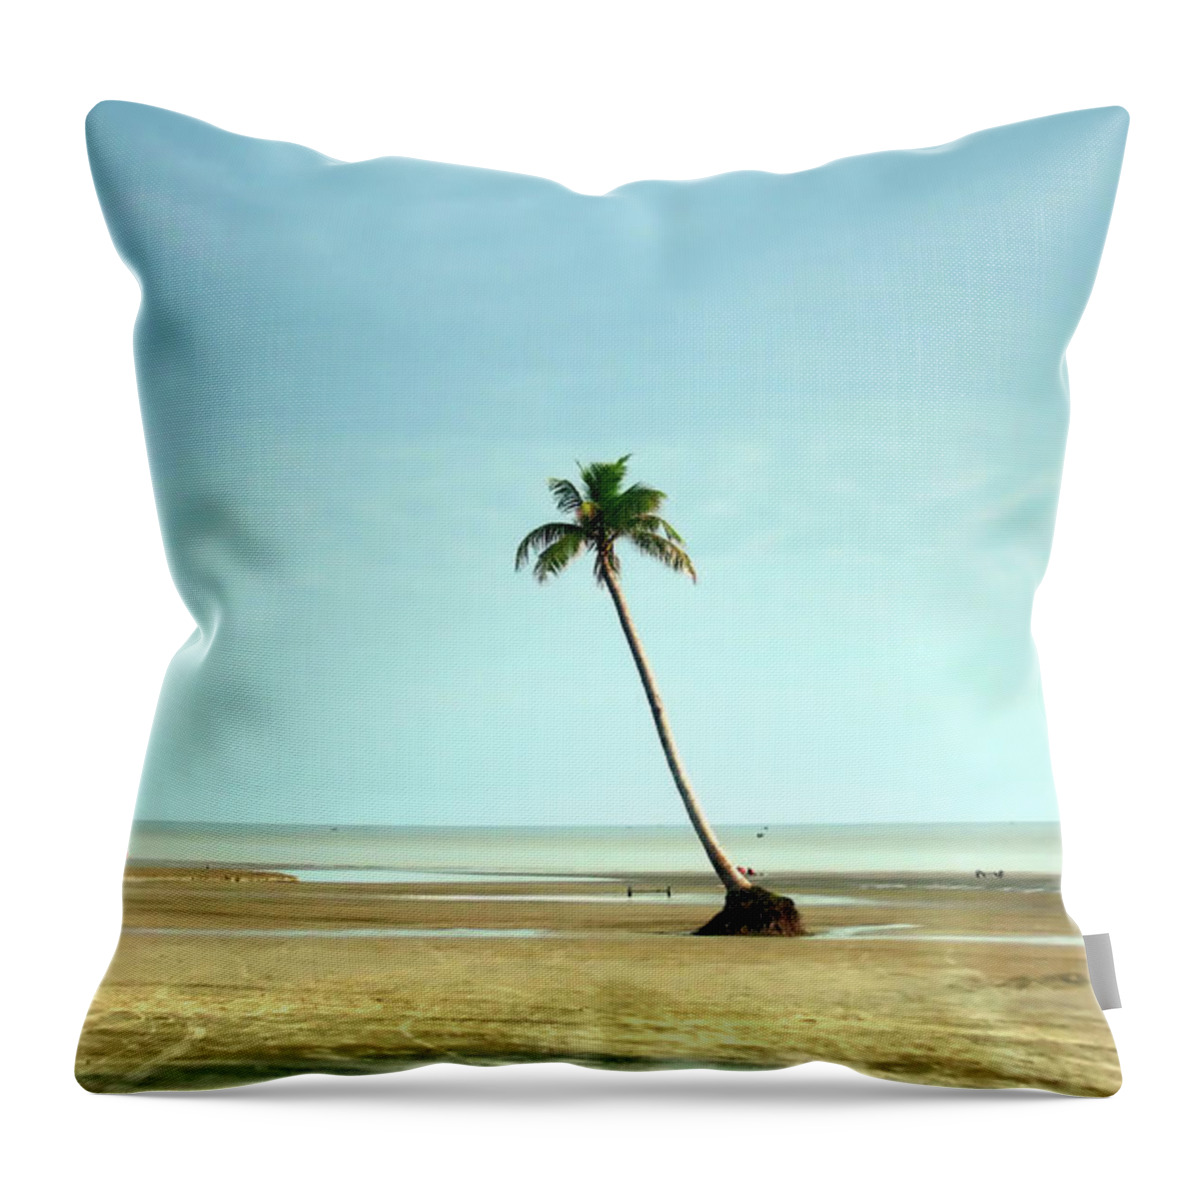 Clear Sky Throw Pillow featuring the photograph Coconut Tree On Beach by Neaz Ahmed